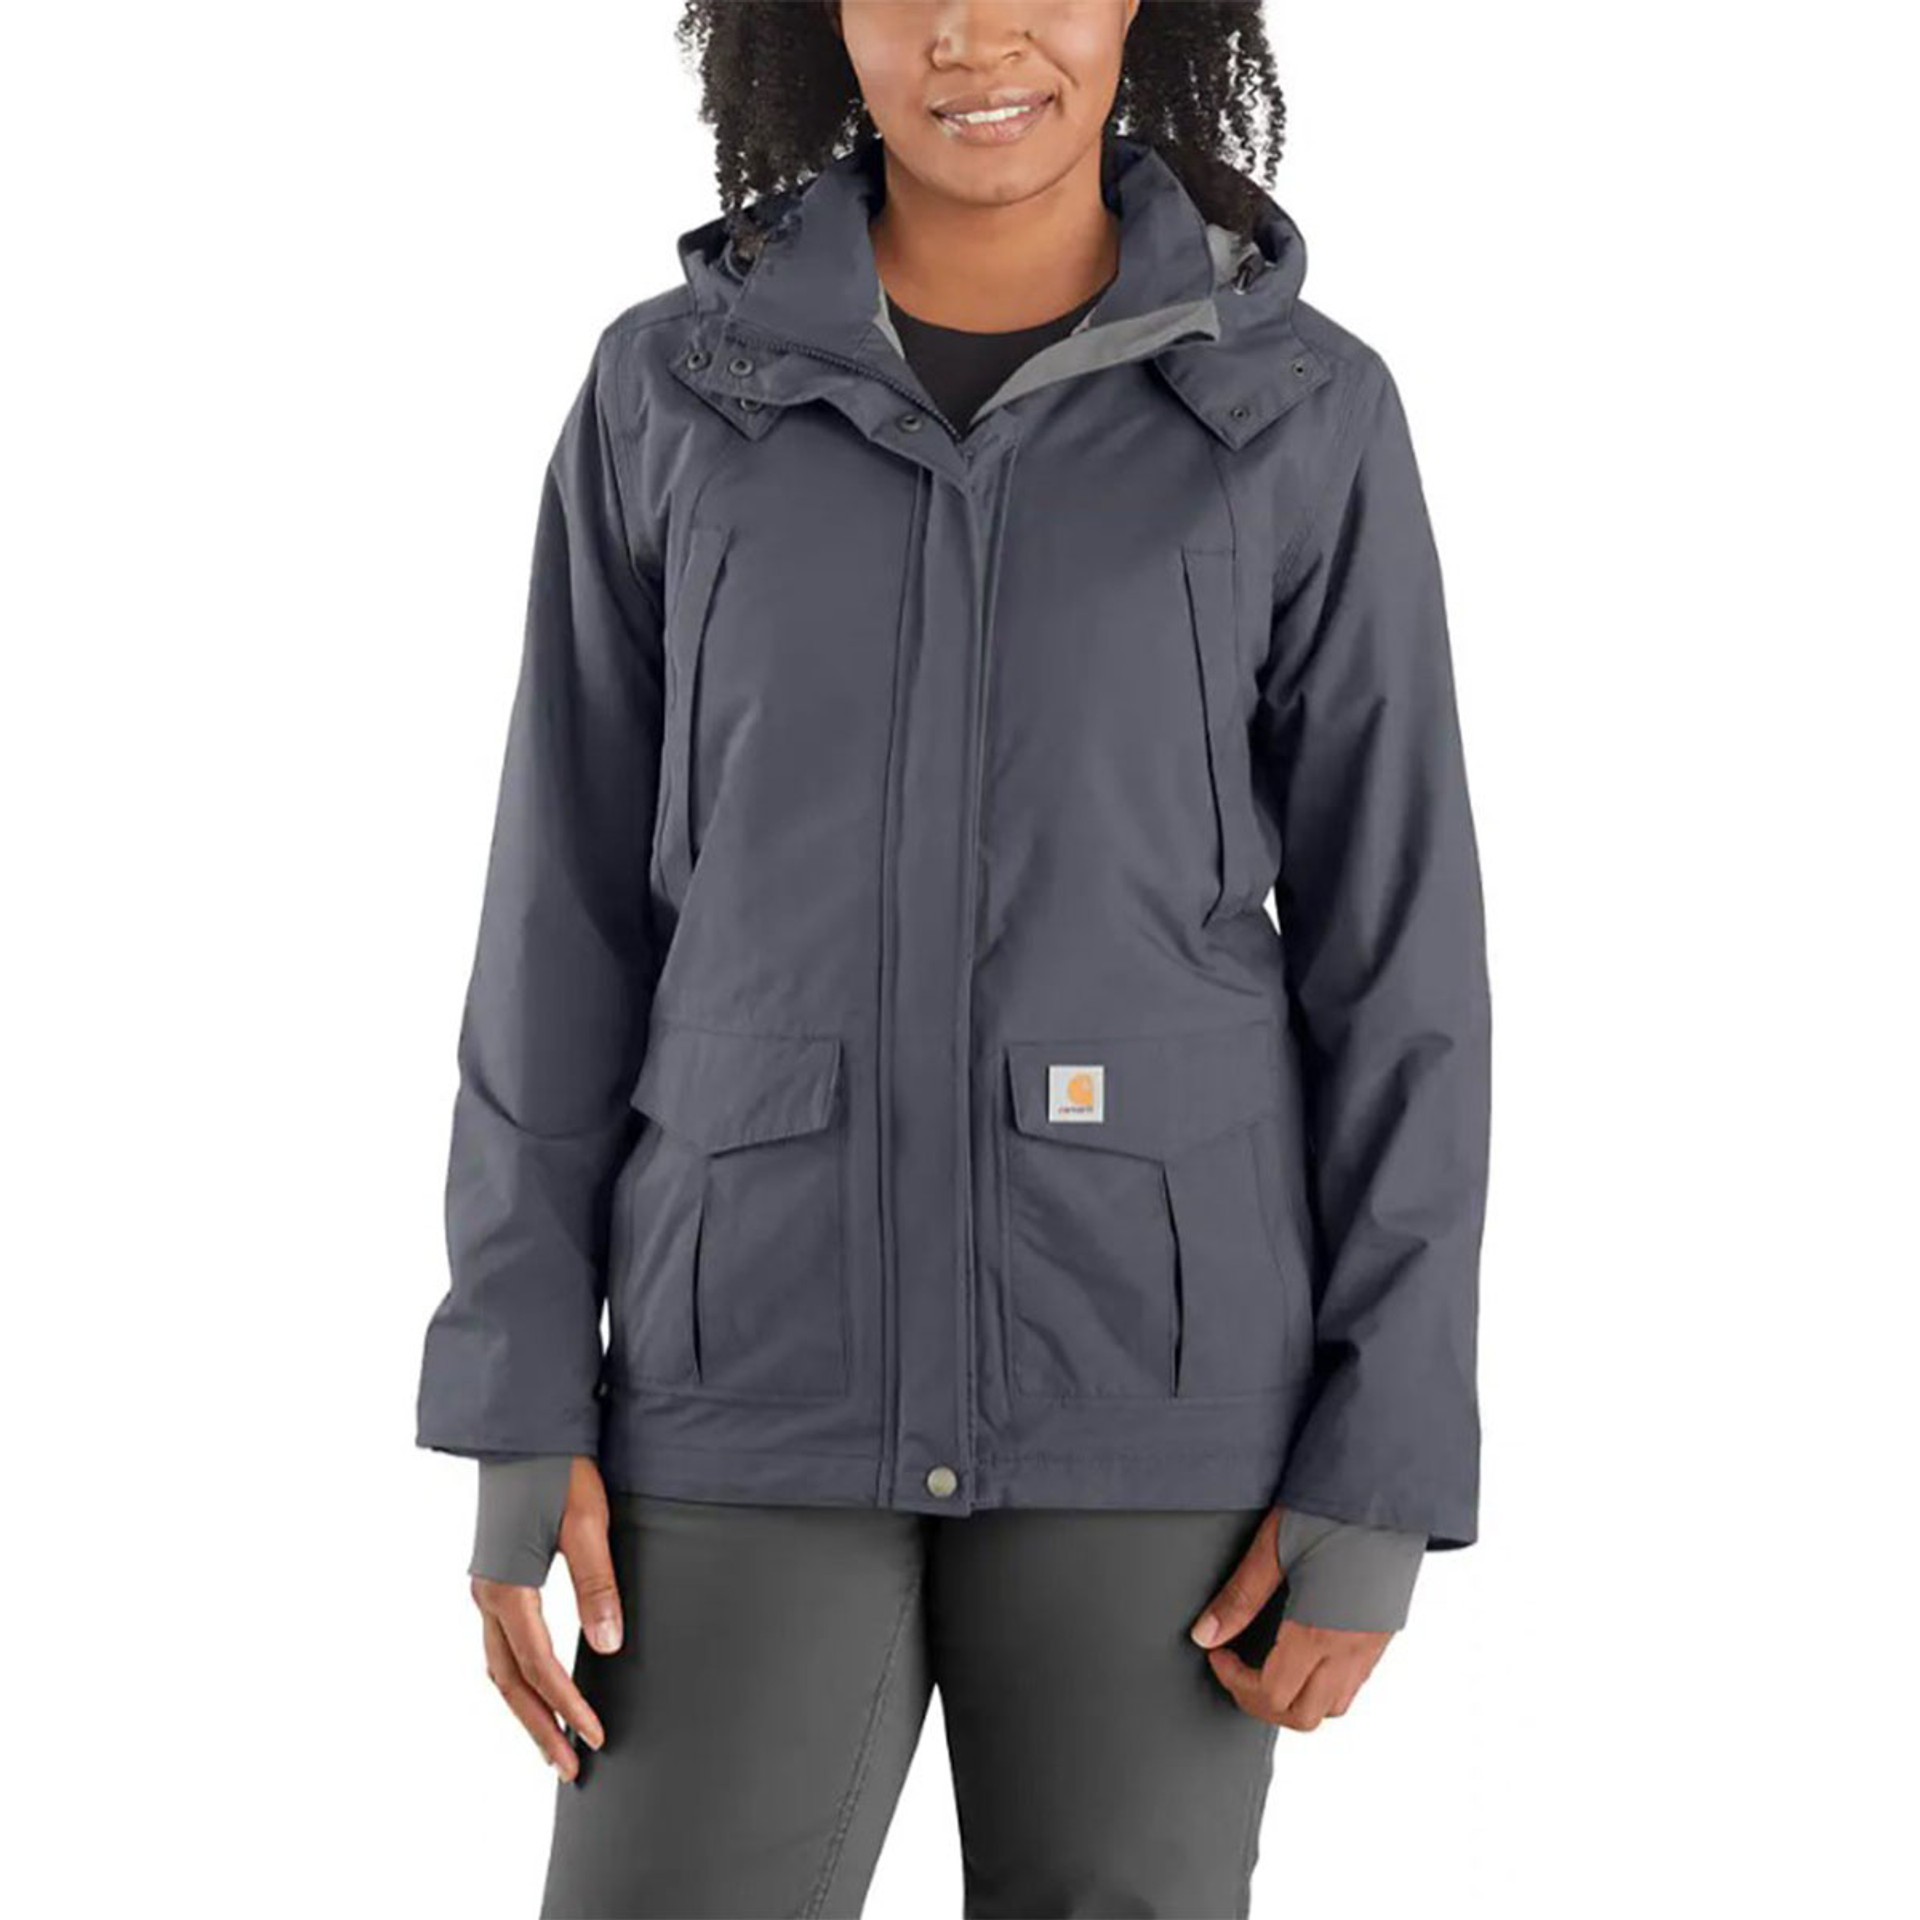 Under Armour Women's Storm Insulated Jacket | Rogers Sporting Goods